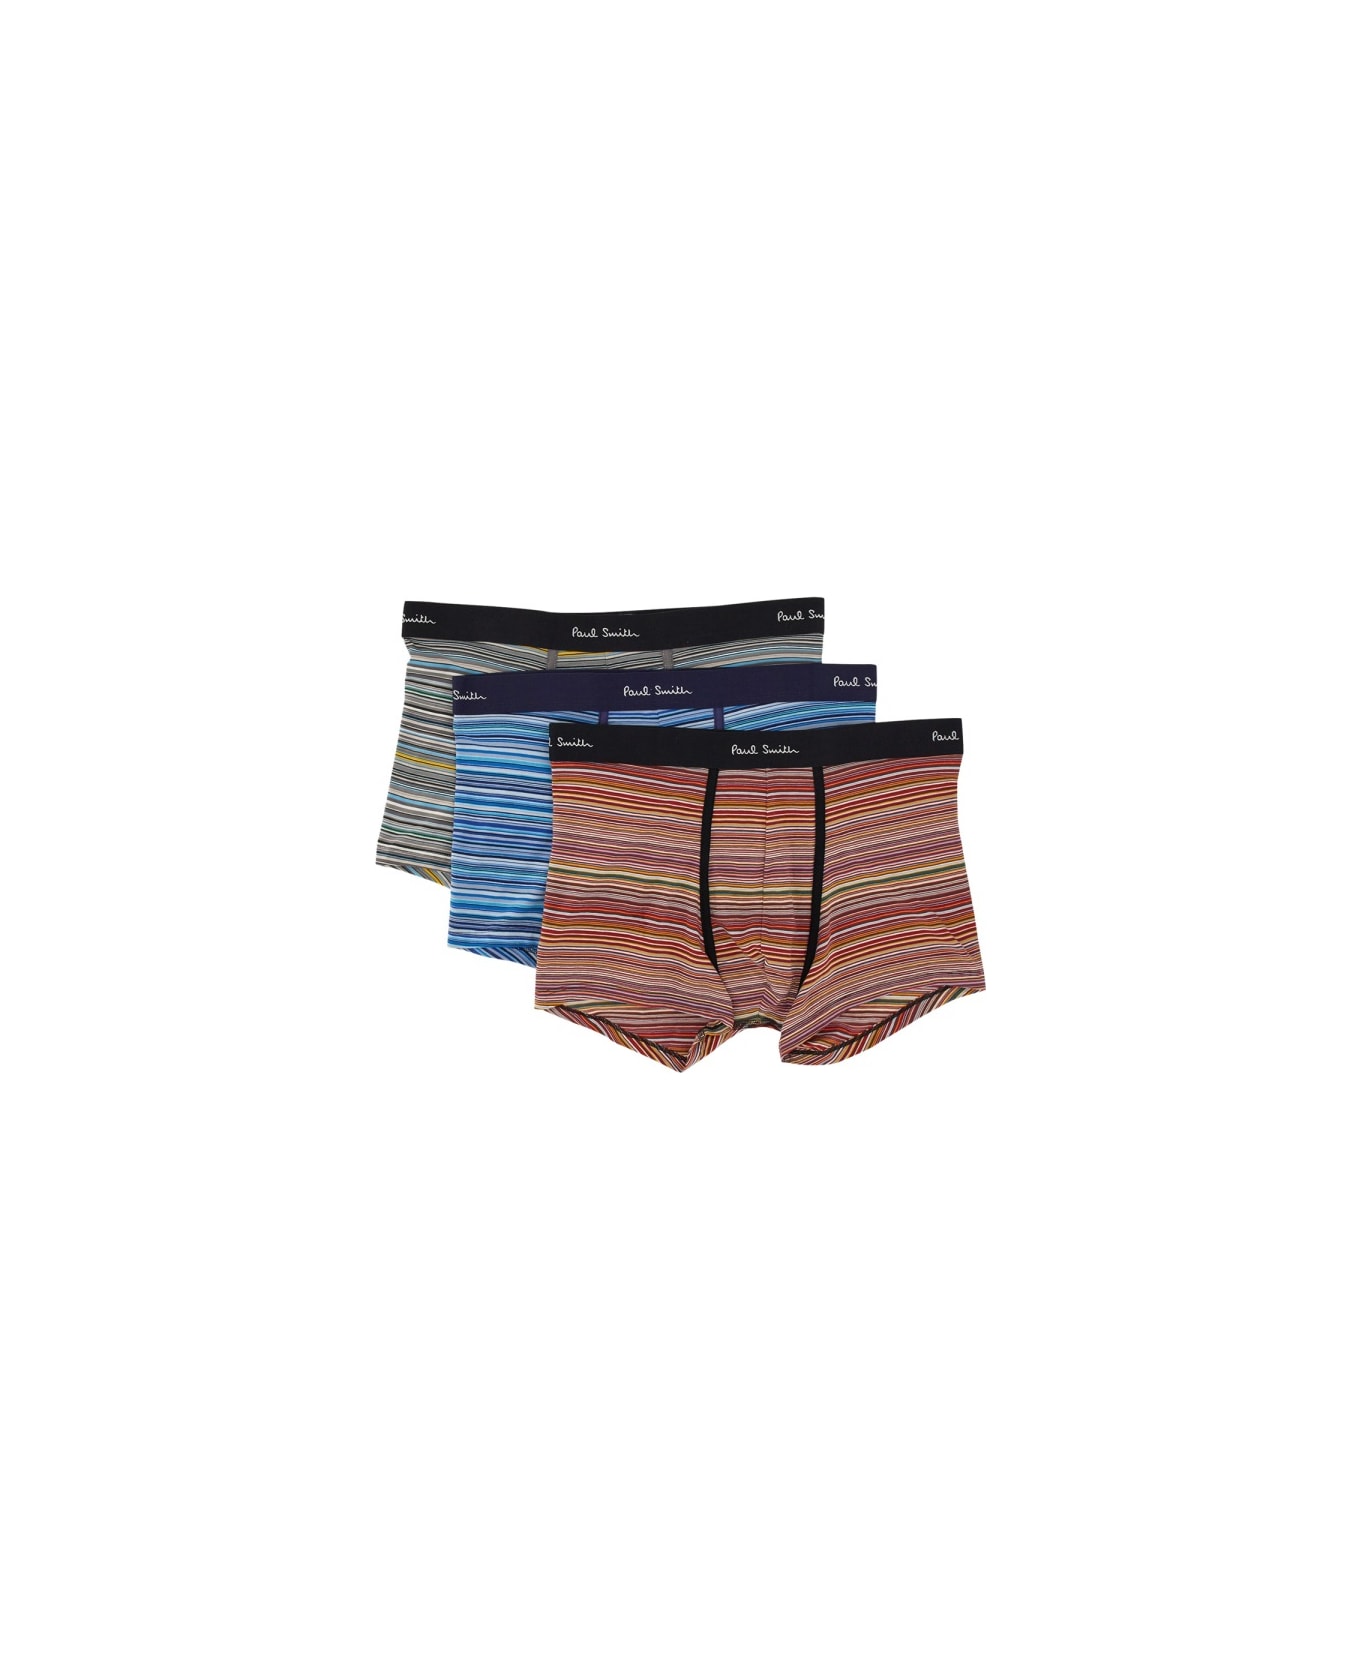 Paul Smith Pack Of Three Boxers - MultiColour